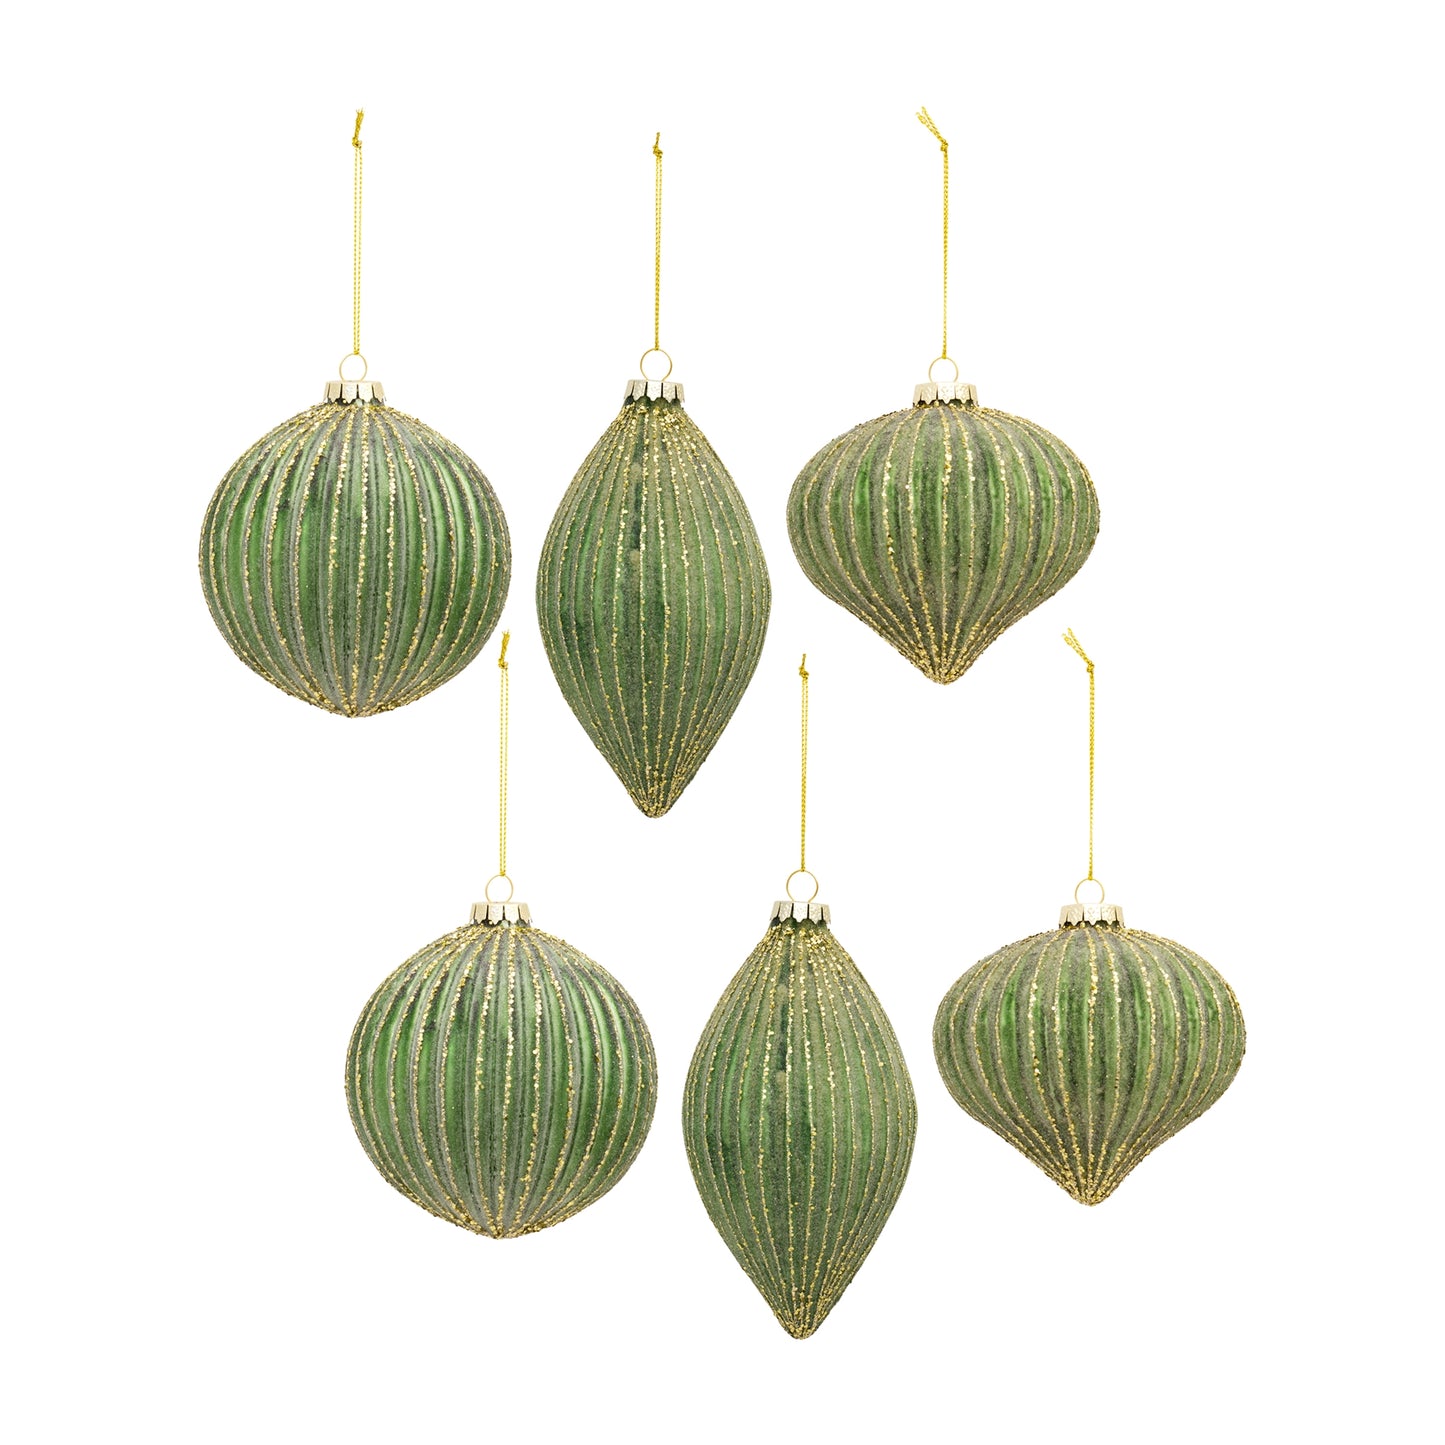 Ribbed Glass Ornament with Gold Accent (Set of 6)